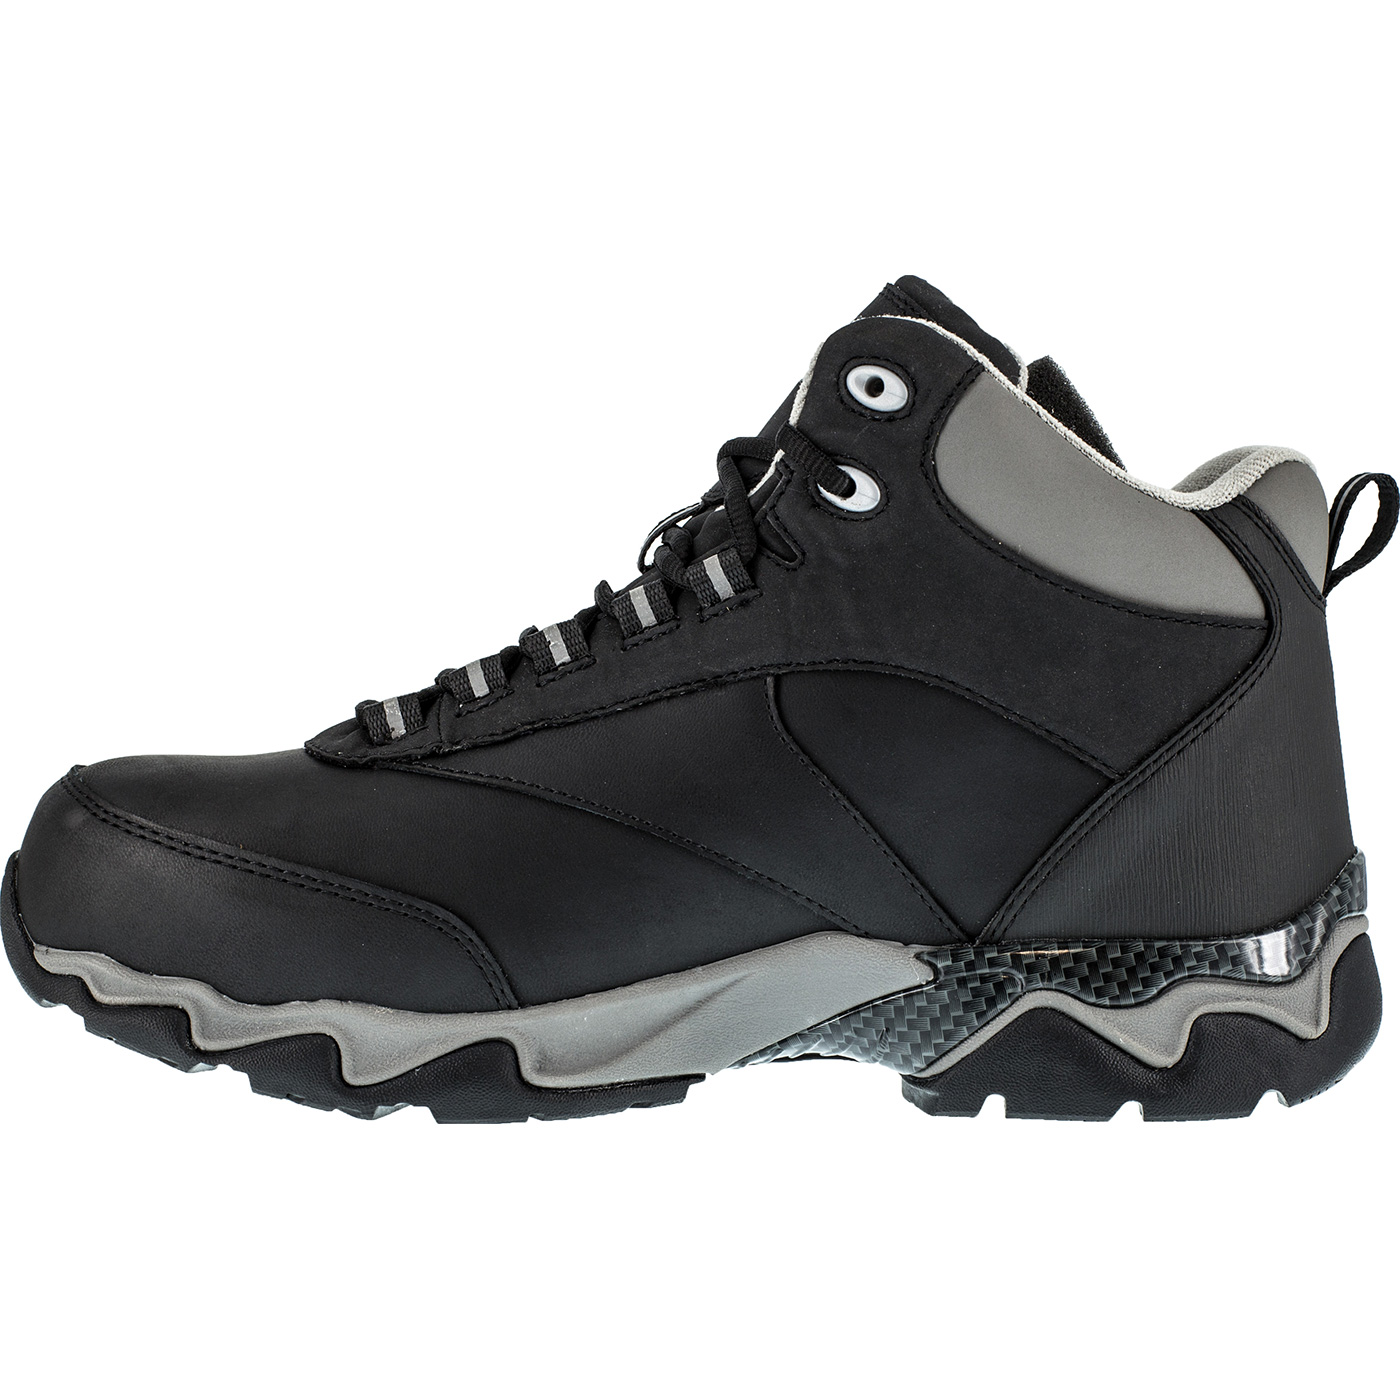 Reebok Work  Mens Beamer Mid Composite Toe Eh  Work Safety Shoes Casual - image 4 of 5